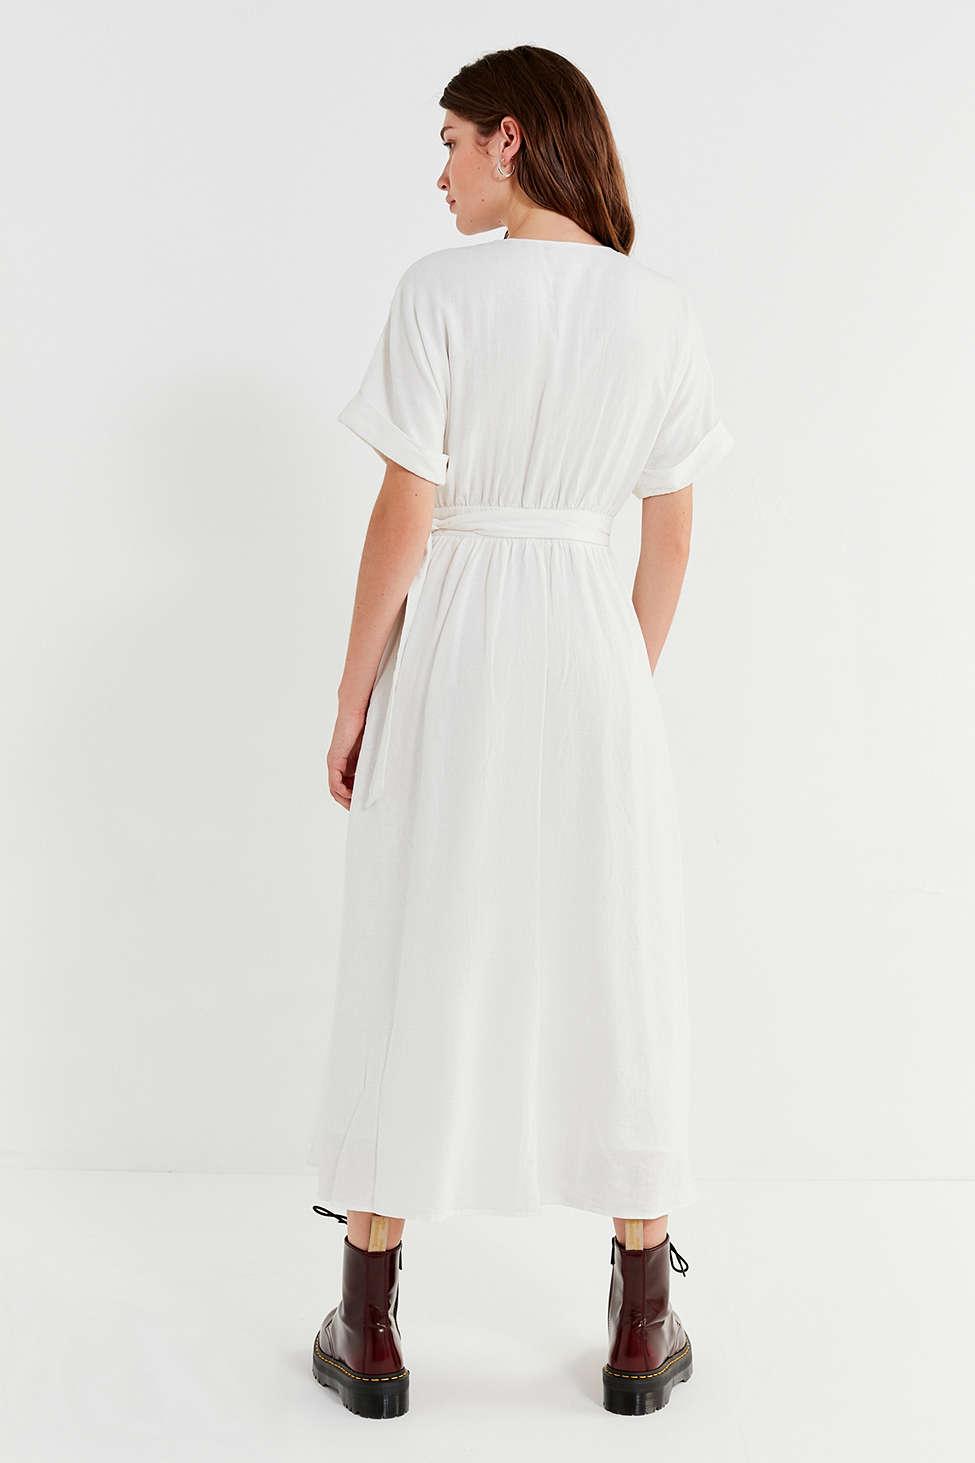 Urban Outfitters Linen Wrap Dress on Sale, UP TO 64% OFF |  www.aramanatural.es